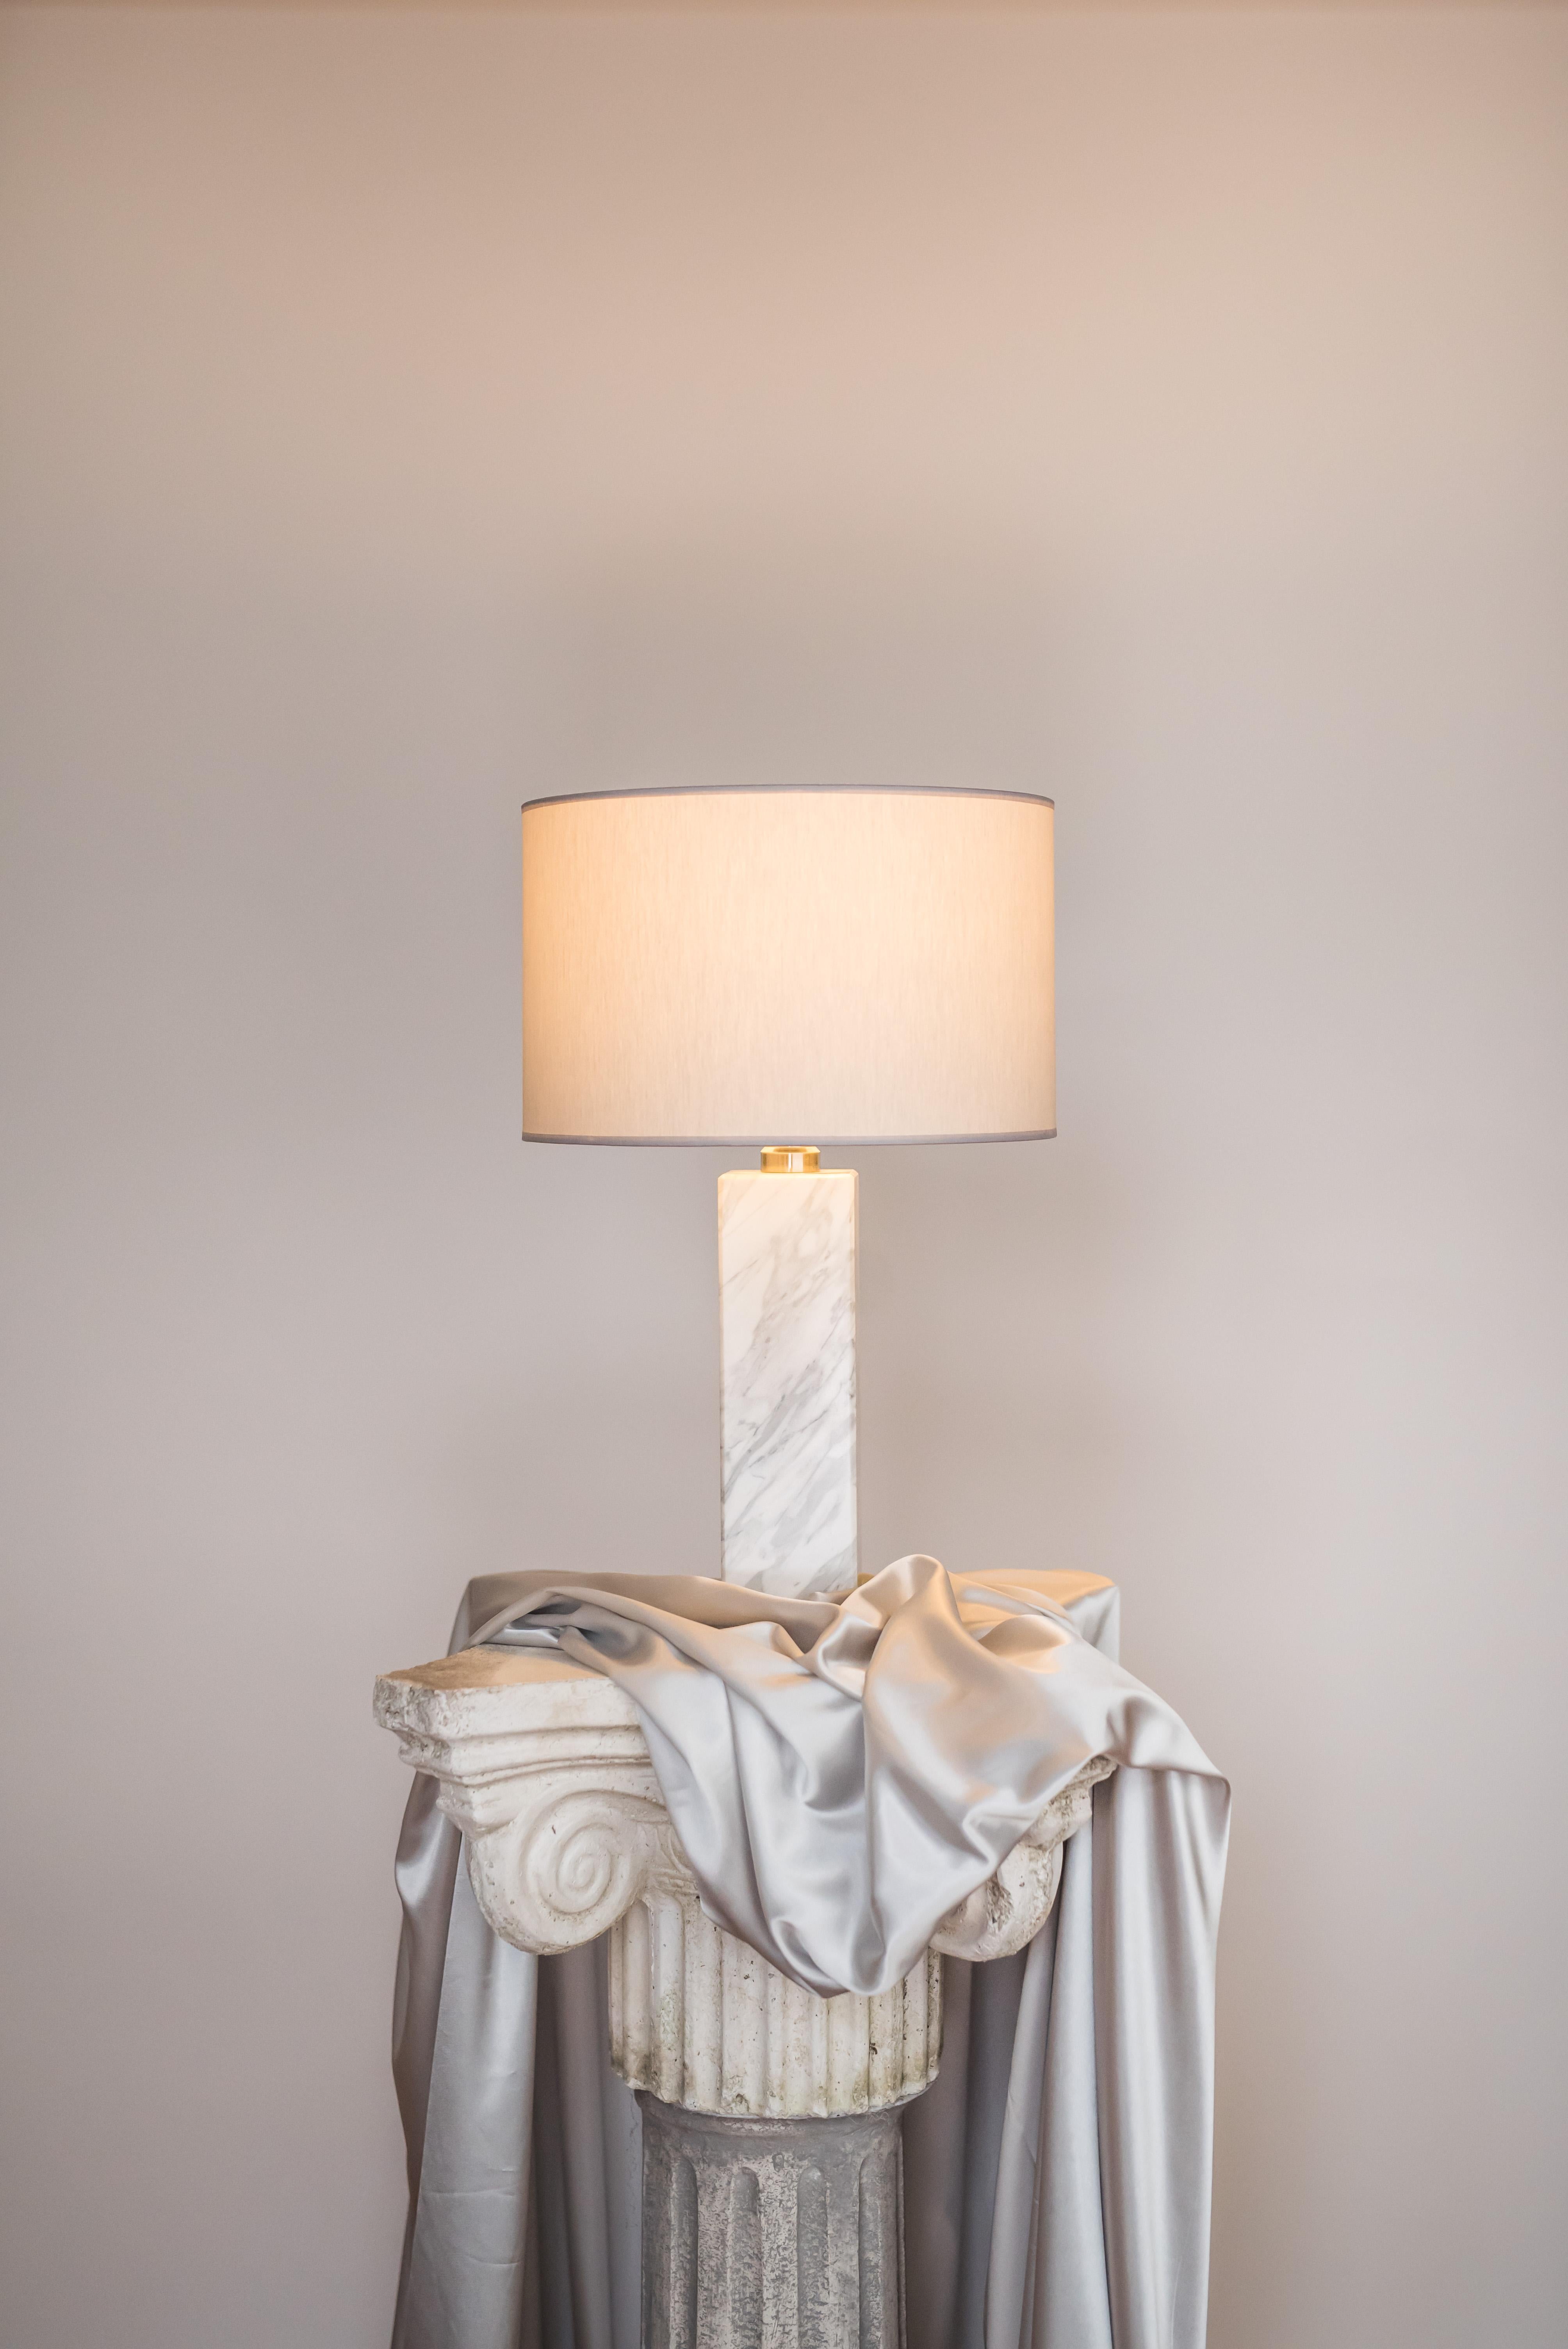 Brass sculpted table lamp by Brajak Vitberg
ATHENS 1.2
Materials: Mura marble (also available with Carrara marble), Polished brass
white or black cotton lampshade, cotton wiring
Dimensions: 52 x 35 x 35 cm

Bijelic and Brajak are two